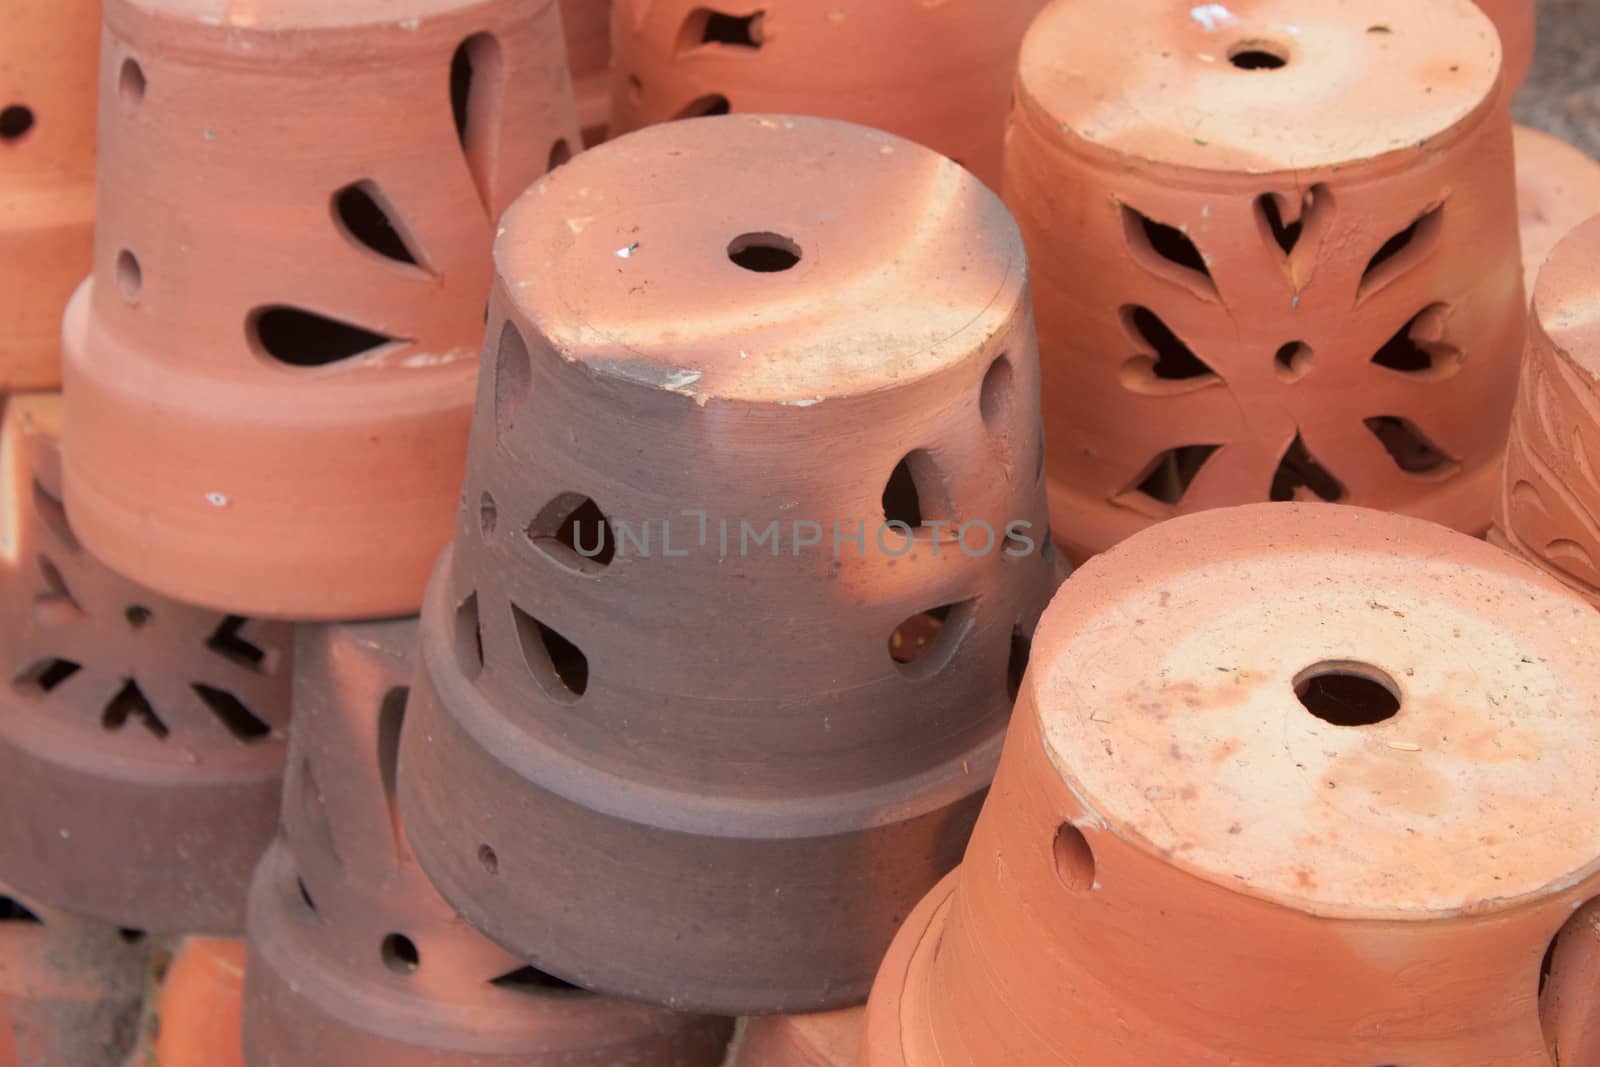 Ceramic pots with designs from Thailand.